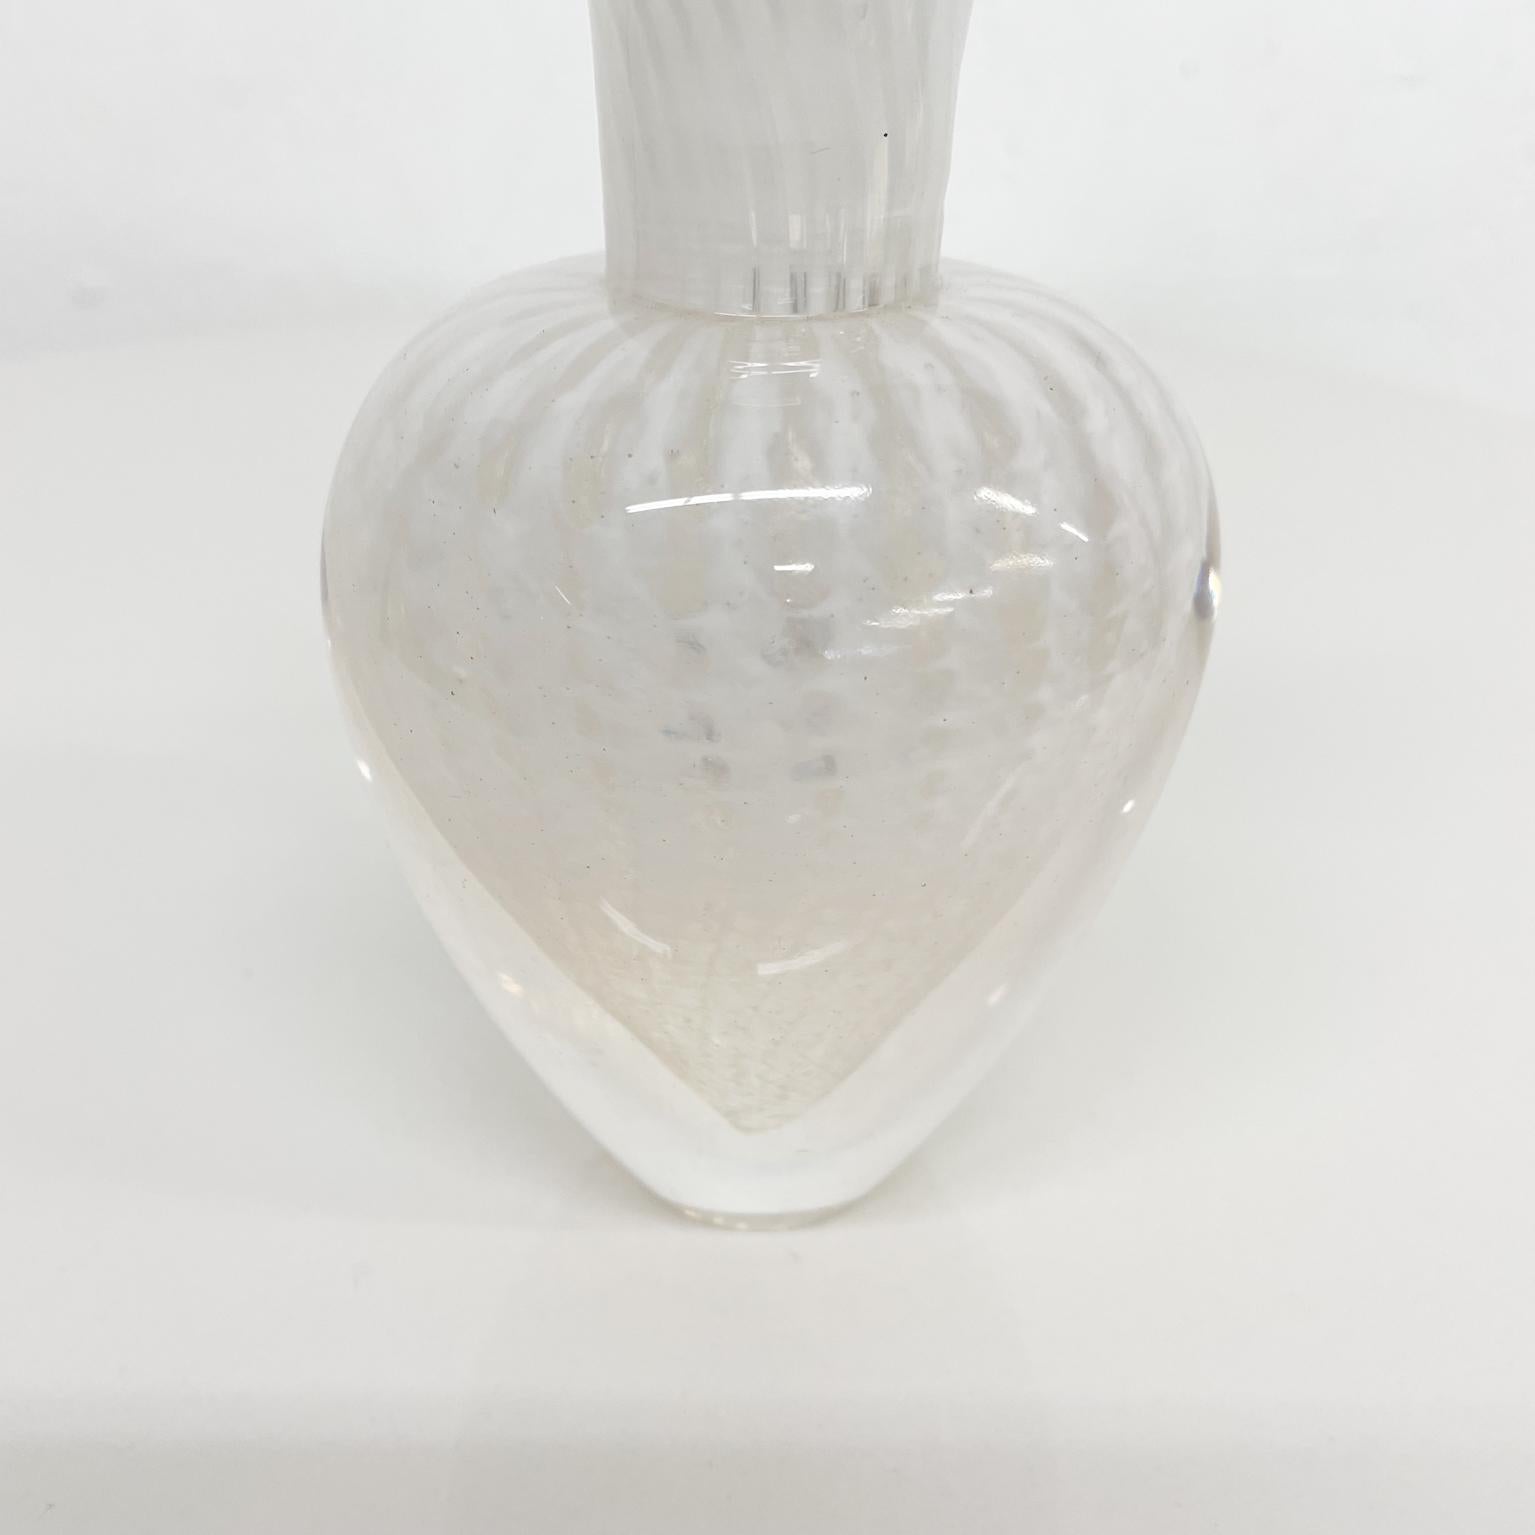 Mid-20th Century Lovely Murano Swirled White Art Glass Perfume Bottle with Stopper Italy